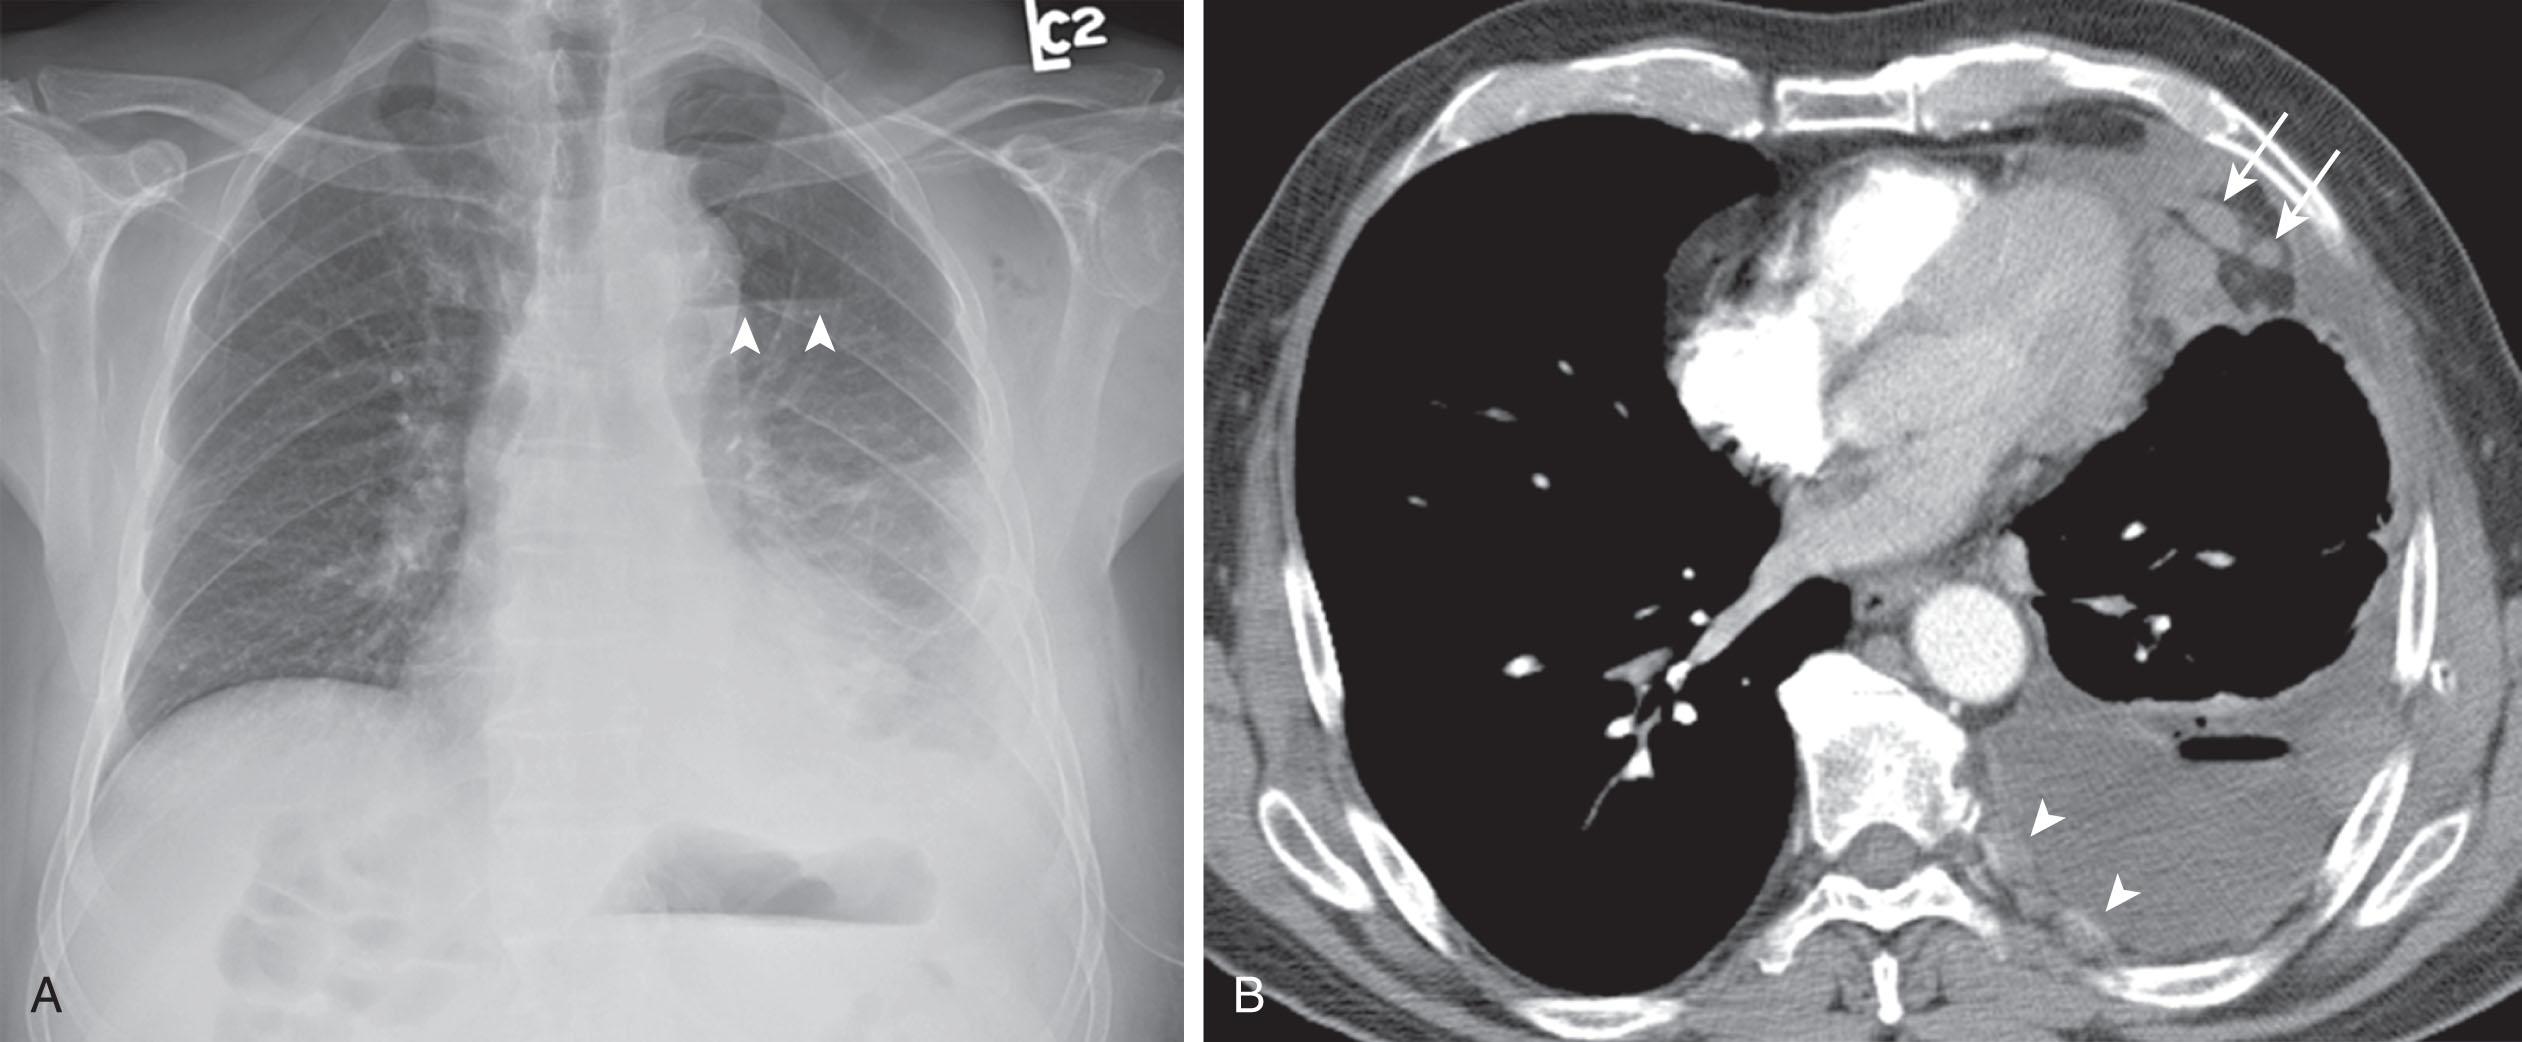 Figure 9.2, A 70-year-old man presented with shortness of breath and underwent left thoracentesis. A , Posteroanterior chest radiograph shows a left pleural catheter with an air–fluid level ( arrowheads ) in the left pleural space. B , Contrast-enhanced computed tomography scan of the chest shows air and fluid in the left pleural space. Nodular left pleural thickening is consistent with malignant pleural mesothelioma. Note that the lymphatic drainage system for the parietal pleura can be via the left anterior diaphragmatic ( arrows ) and left intercostal ( arrowheads ) lymph nodes.